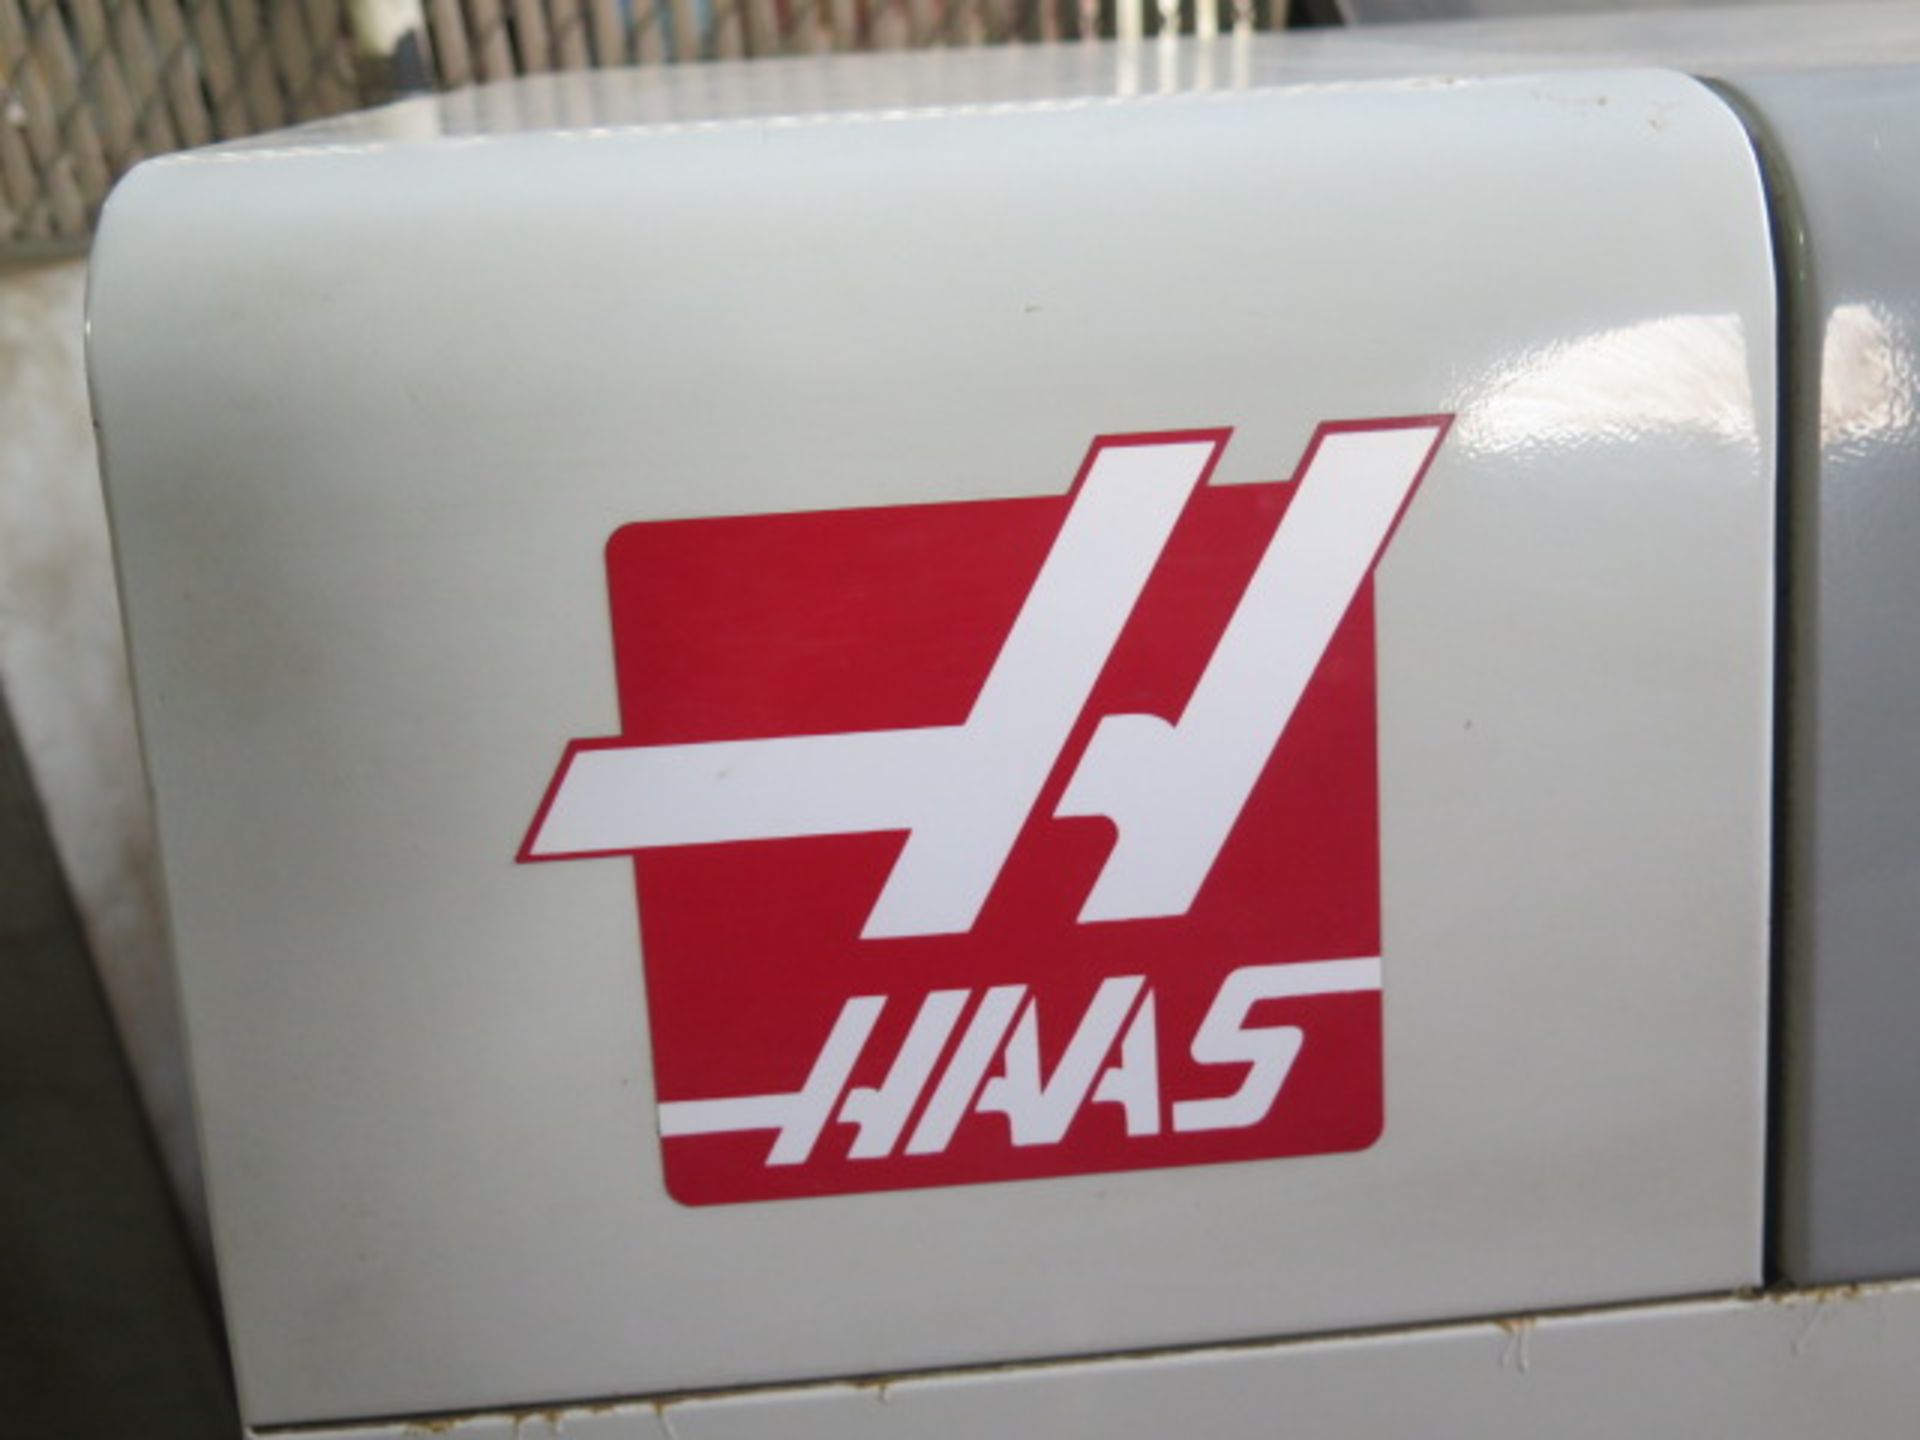 Haas ServoBar 300 Automatic Bar Loader / Feeder (SOLD AS-IS - NO WARRANTY) - Image 6 of 7